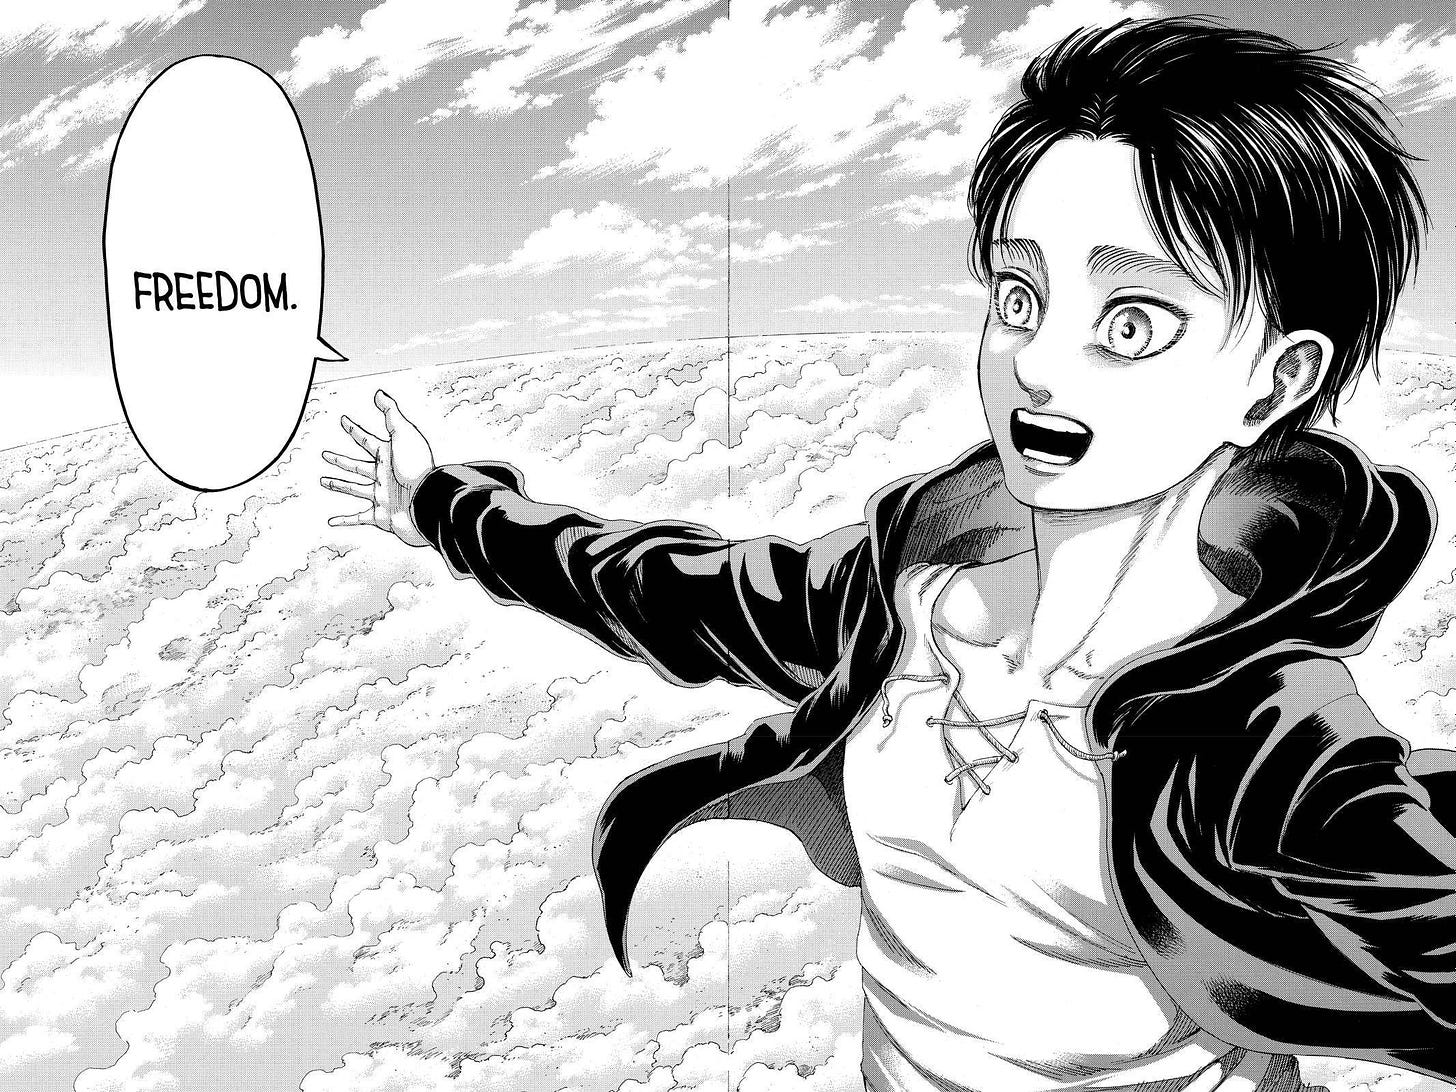 JOL on Twitter: "4. Attack on titan 131 "The Rumbling" Contender for the  Best monologue by a MC in manga, 131 is when AoT peaked for me, amazing  chapter which captures the